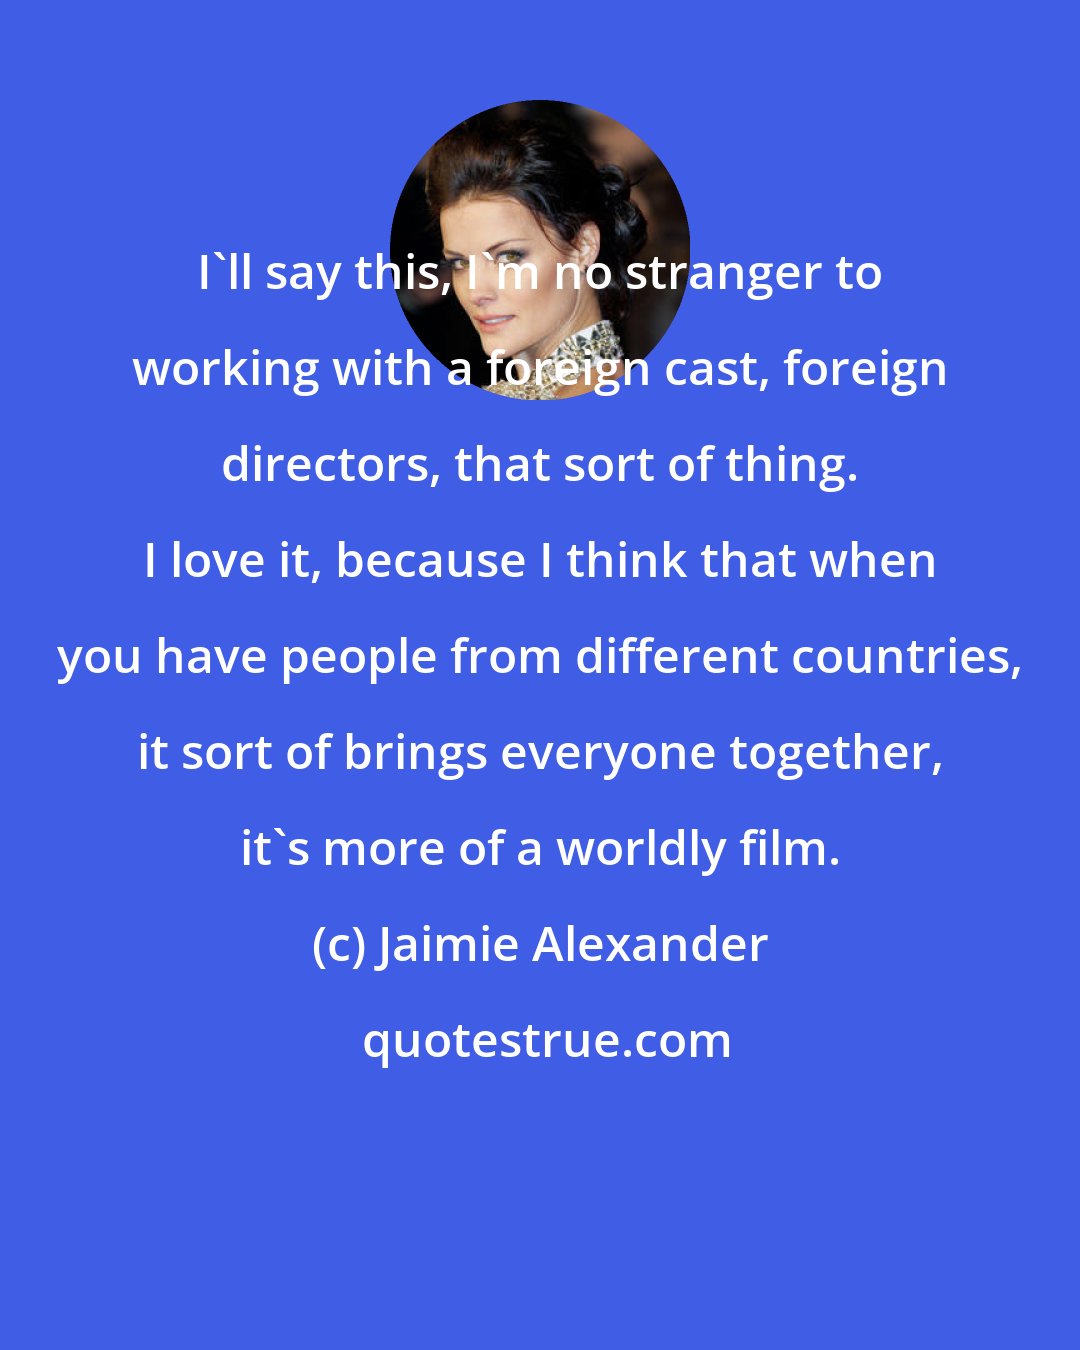 Jaimie Alexander: I'll say this, I'm no stranger to working with a foreign cast, foreign directors, that sort of thing. I love it, because I think that when you have people from different countries, it sort of brings everyone together, it's more of a worldly film.